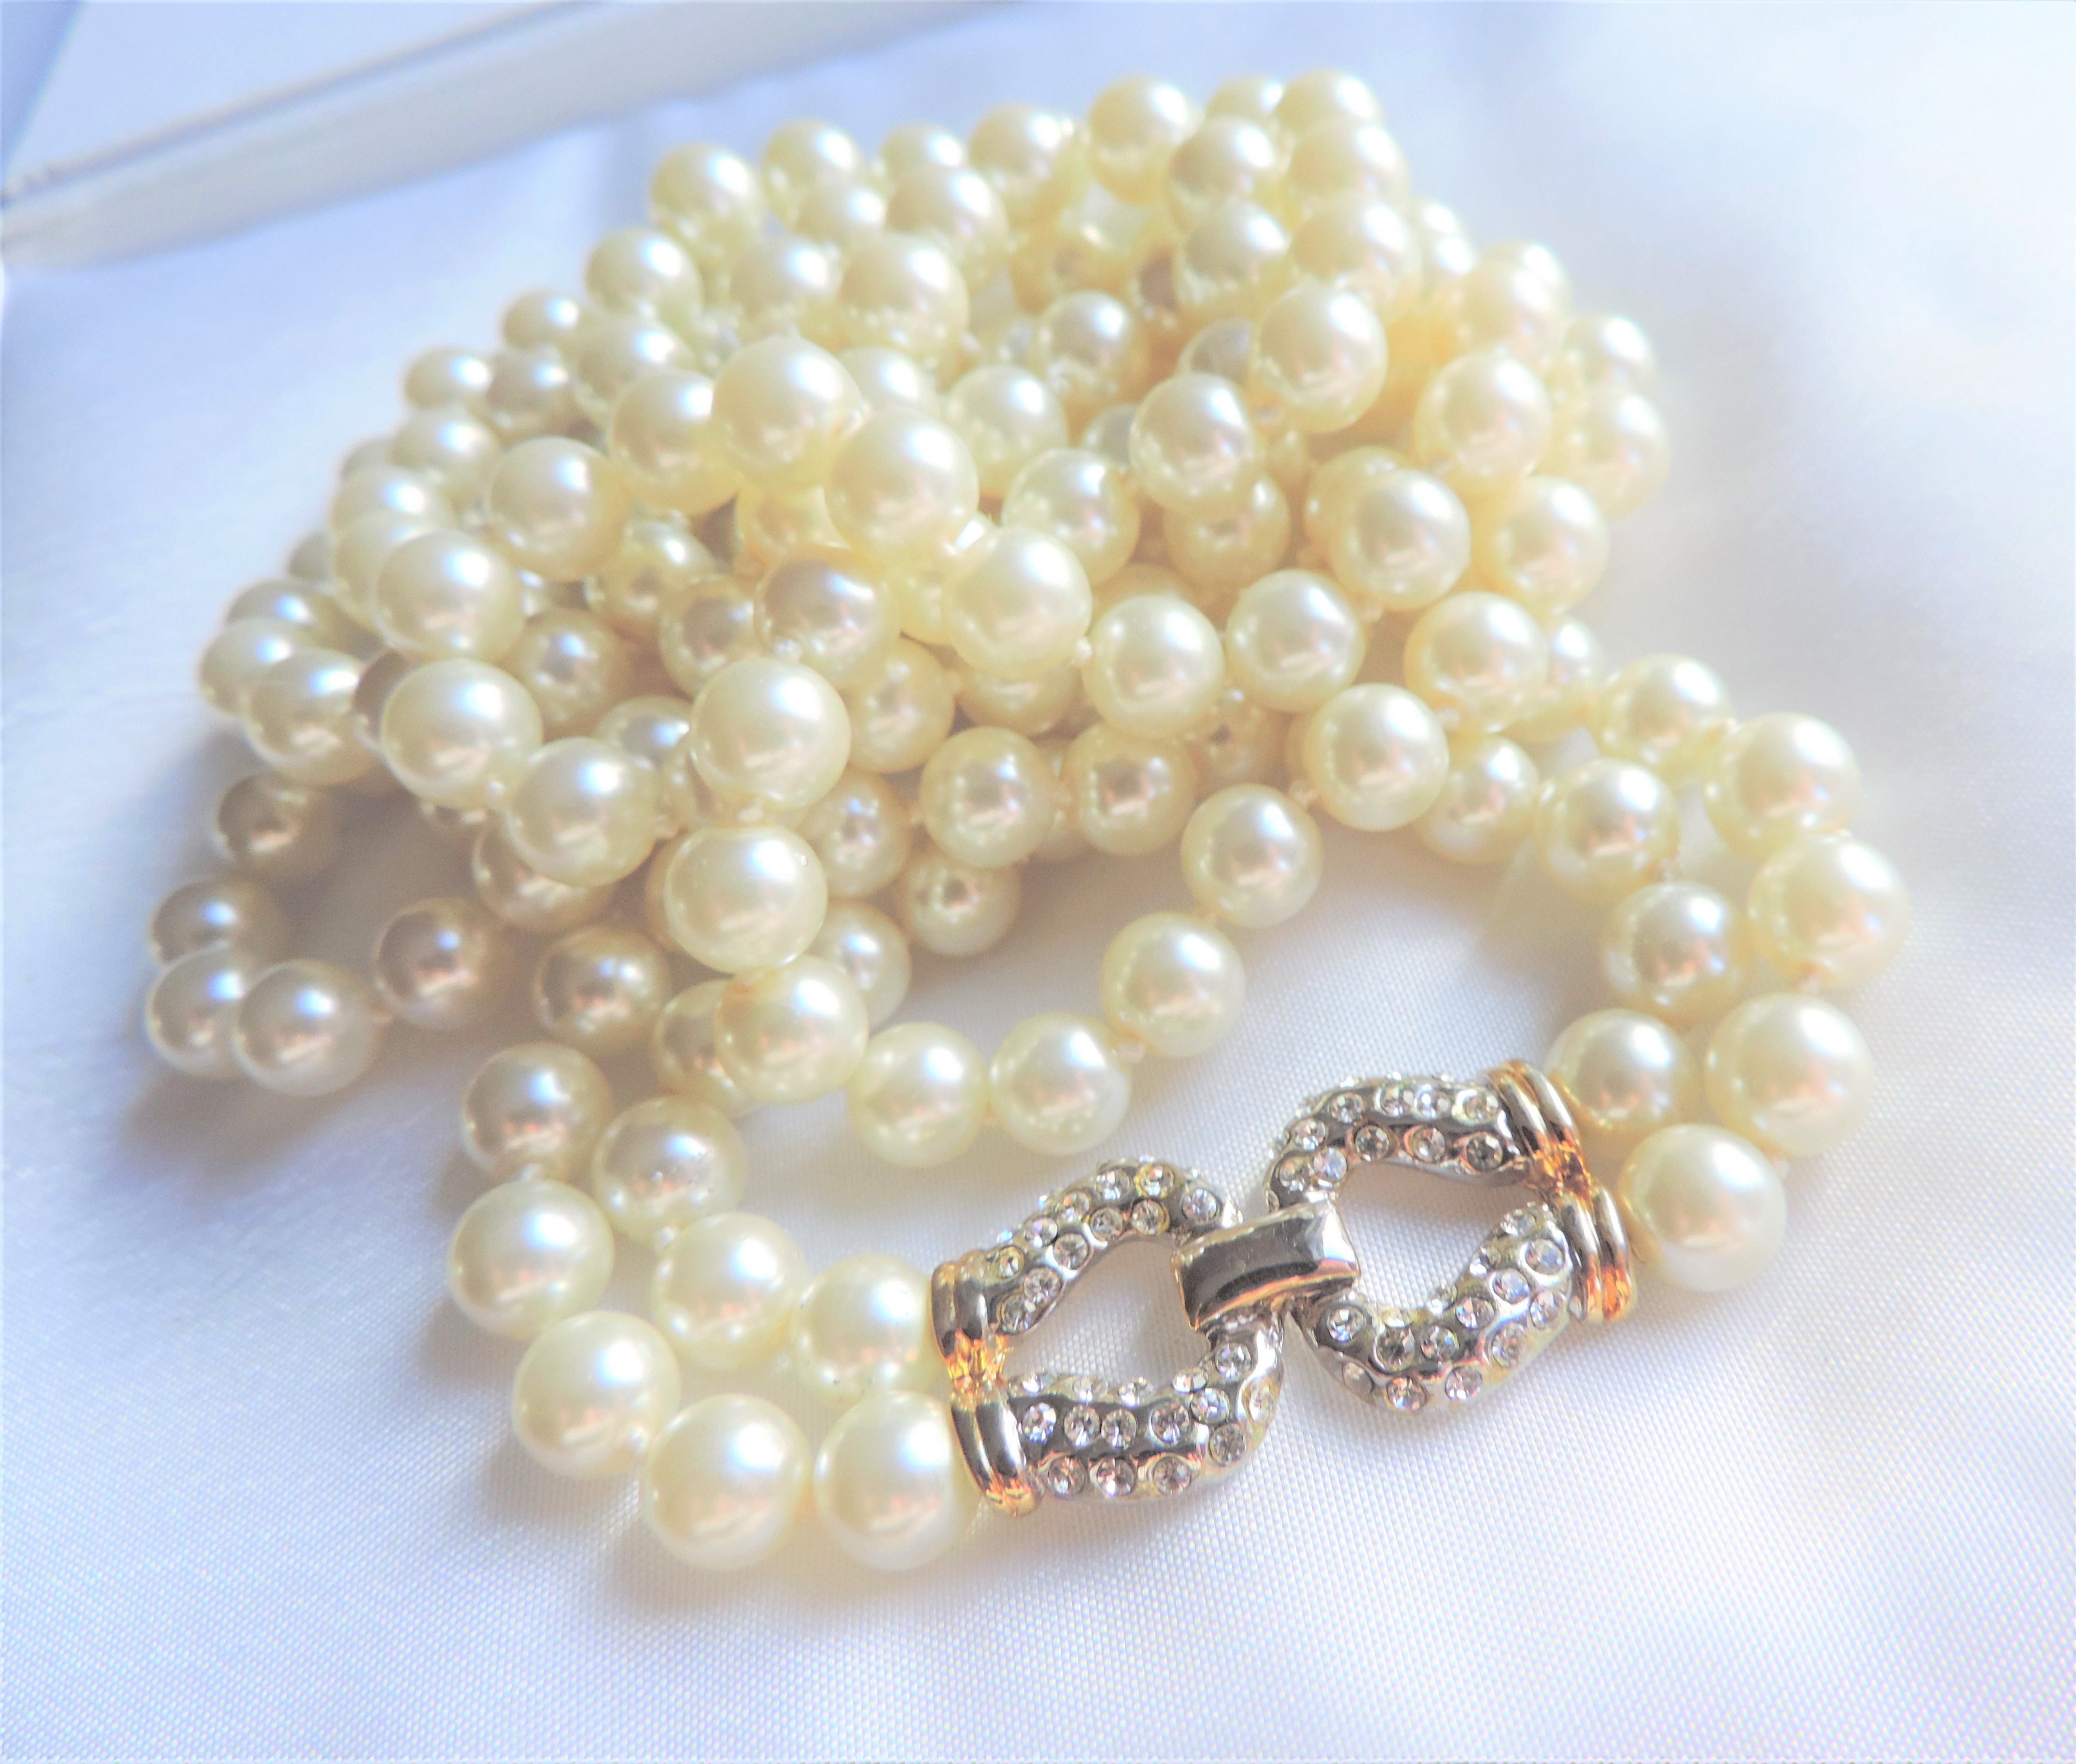 26 Inch Double Strand Pearl Necklace 7mm Size Pearls - Image 4 of 5